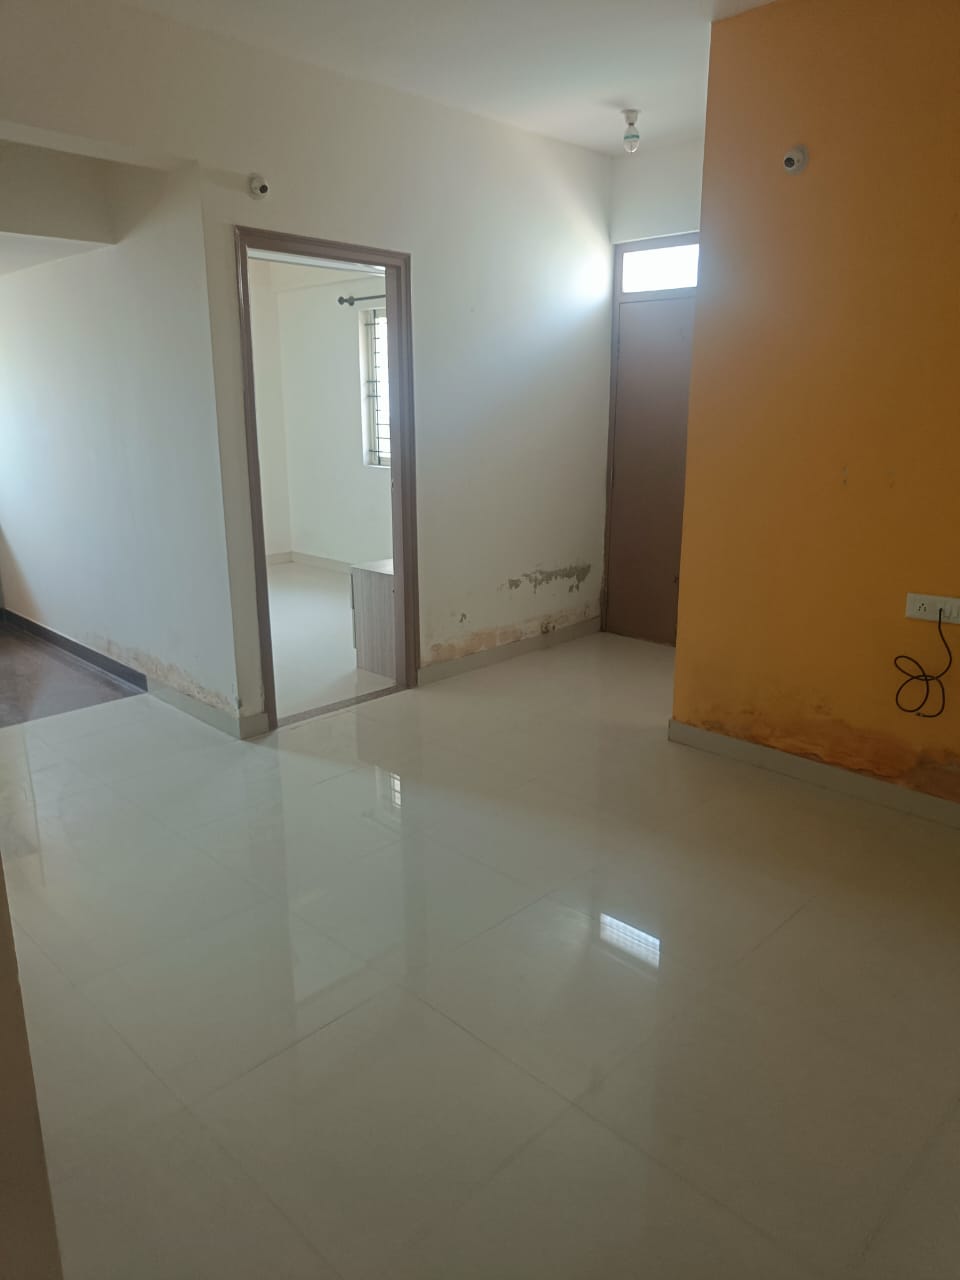 1 BHK Residential Apartment for Lease Only at JAML2 - 3553-12lakh in Singasandra